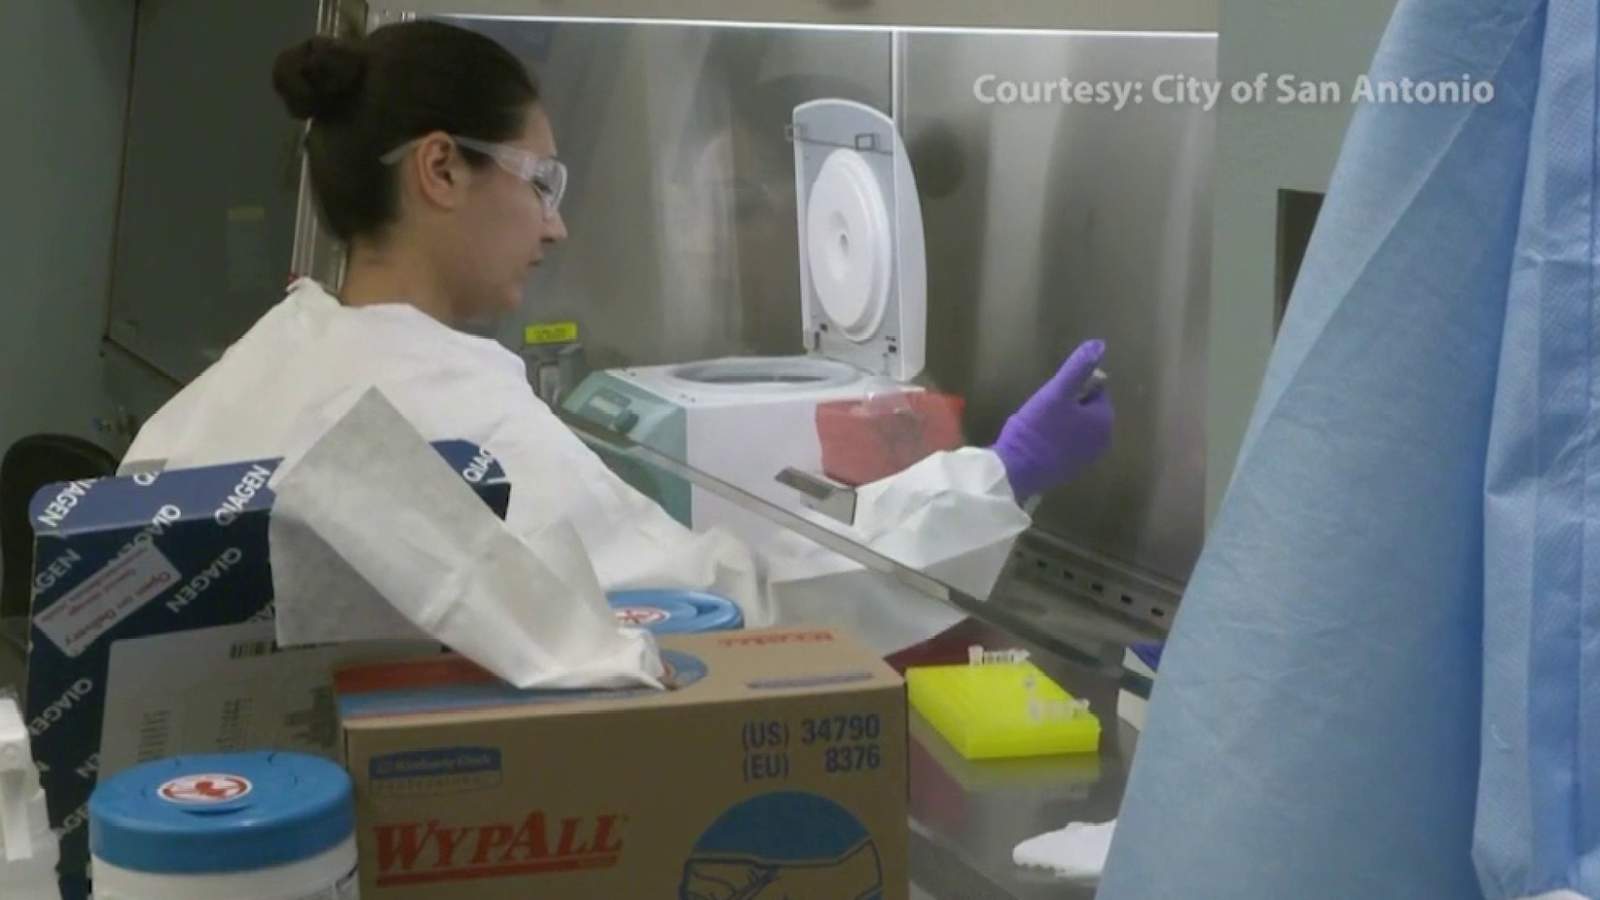 Metro Health: Coronavirus test could cost up to $2,400 without insurance, but there are lower-cost options